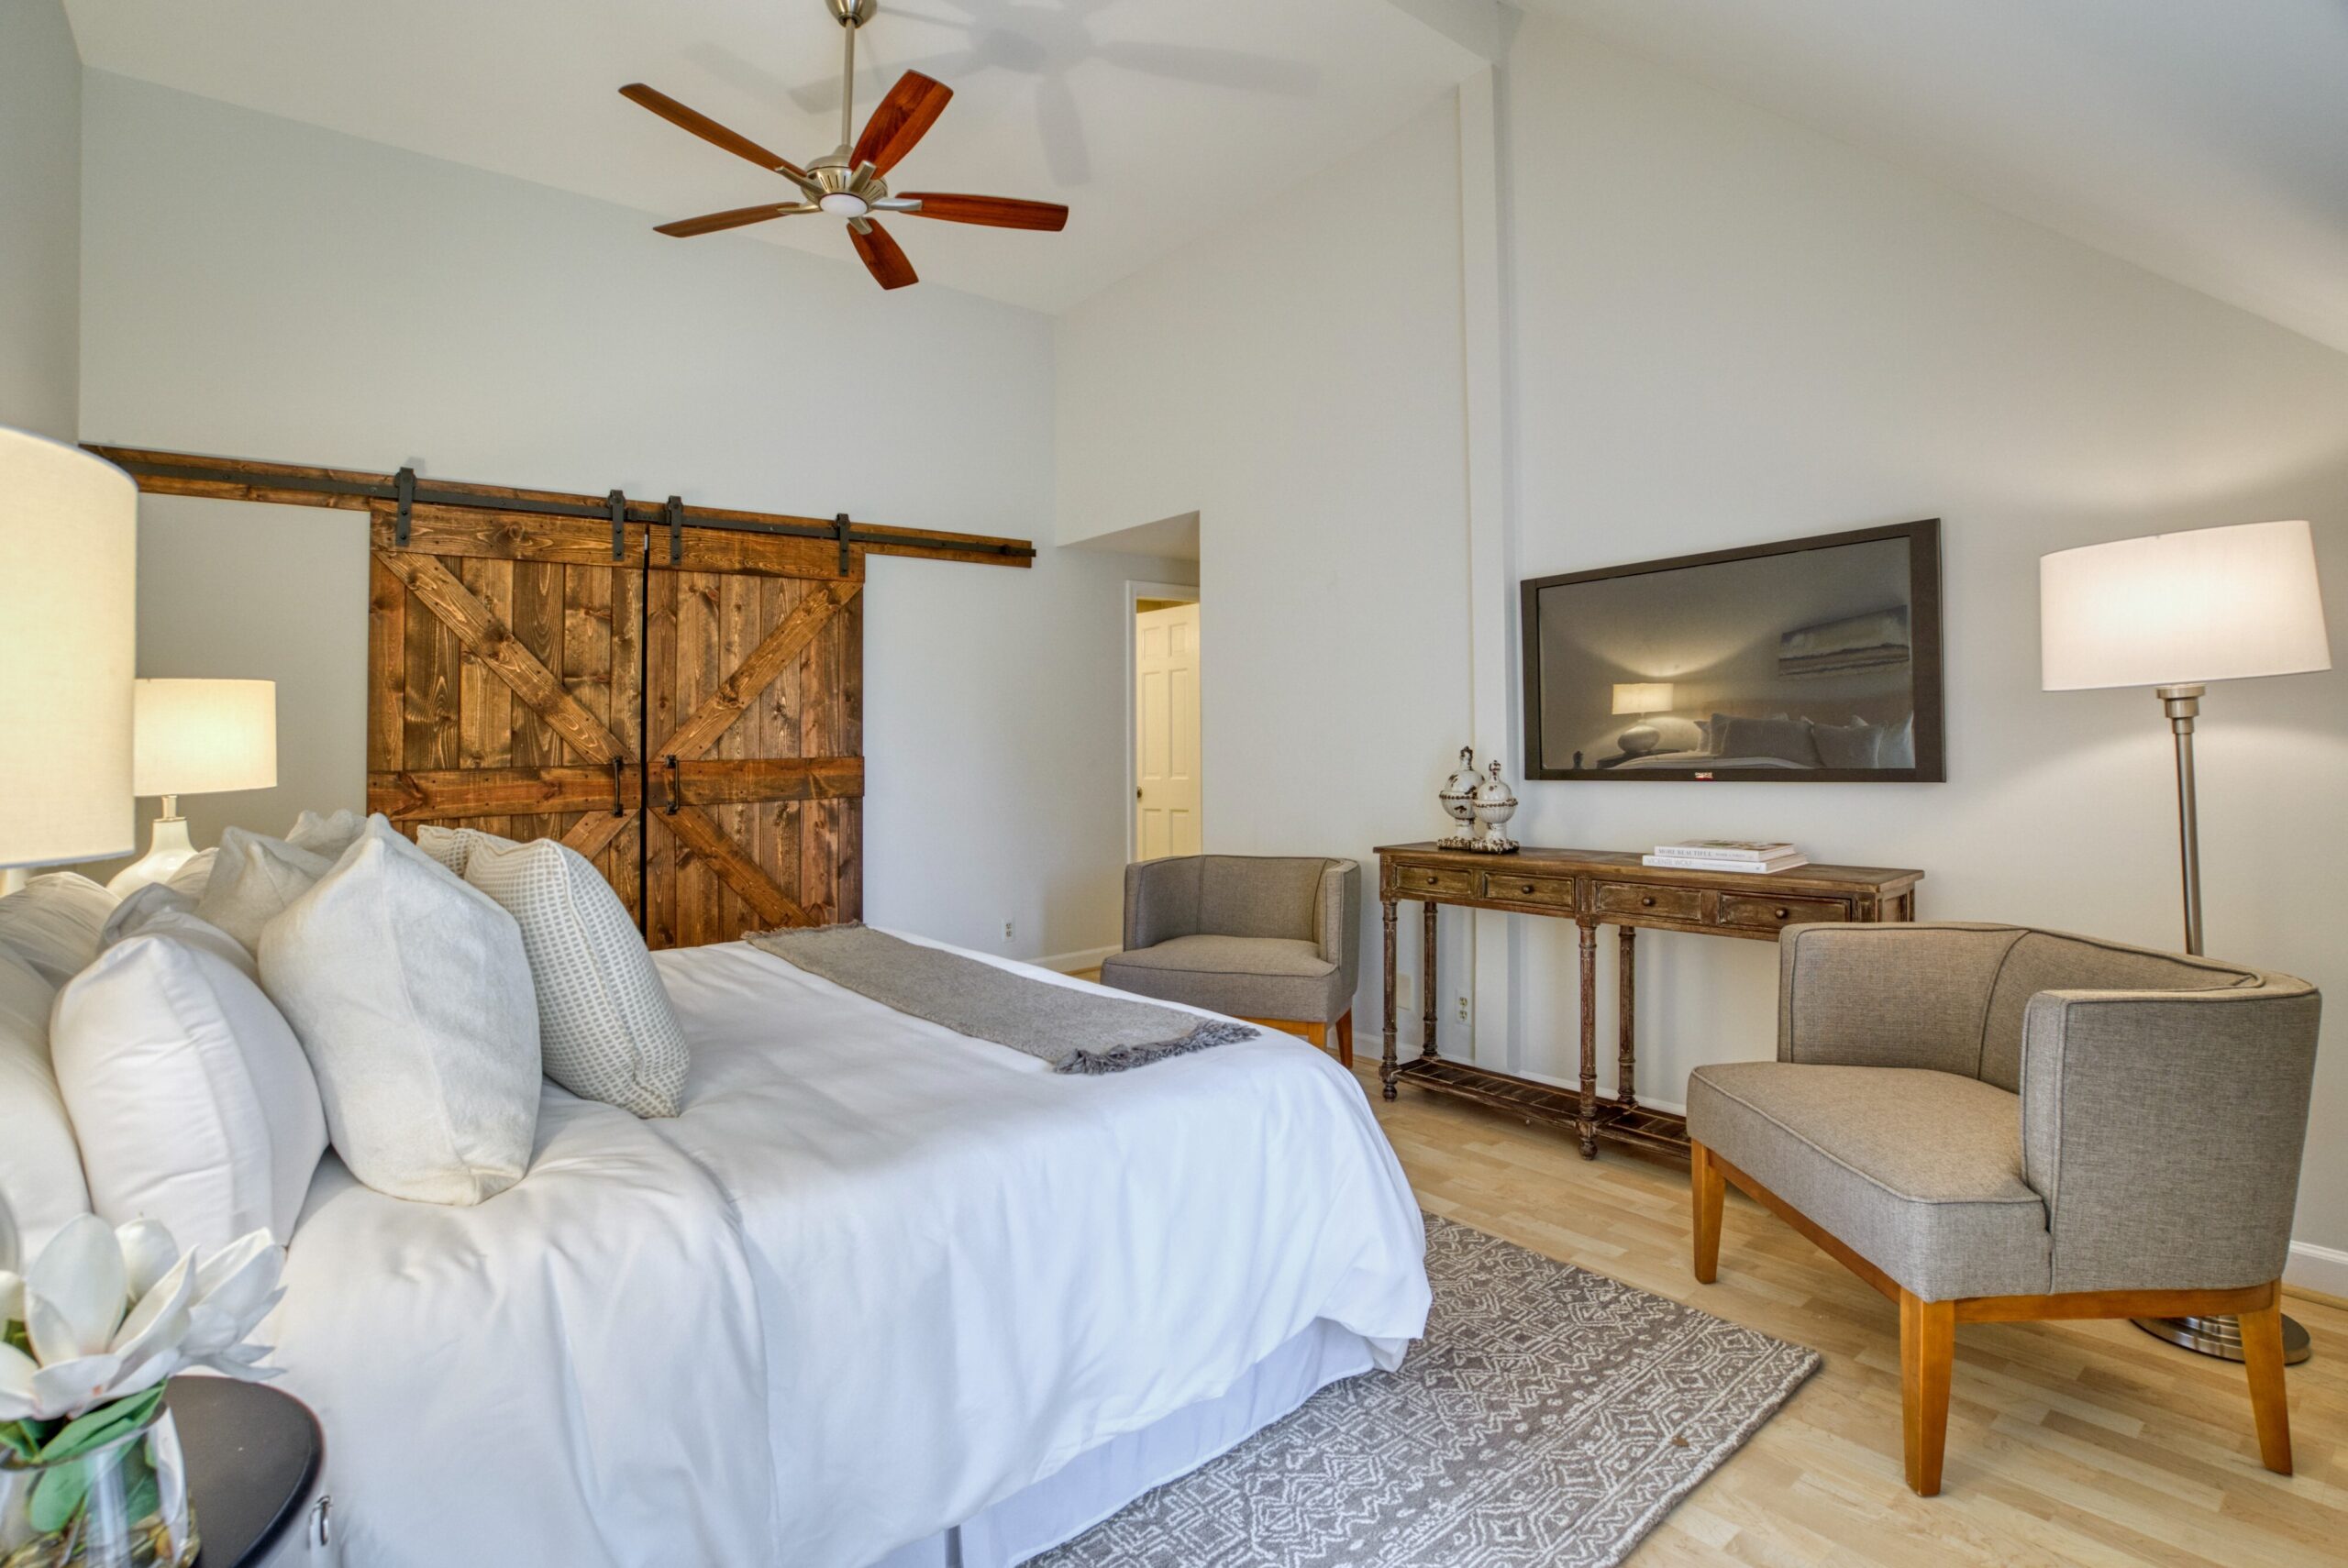 Professional interior photo of 125 N Lee St #401, Alexandria, VA - showing the primary bedroom with barn doors covering the closet, vaulted ceilings and hardwood floors